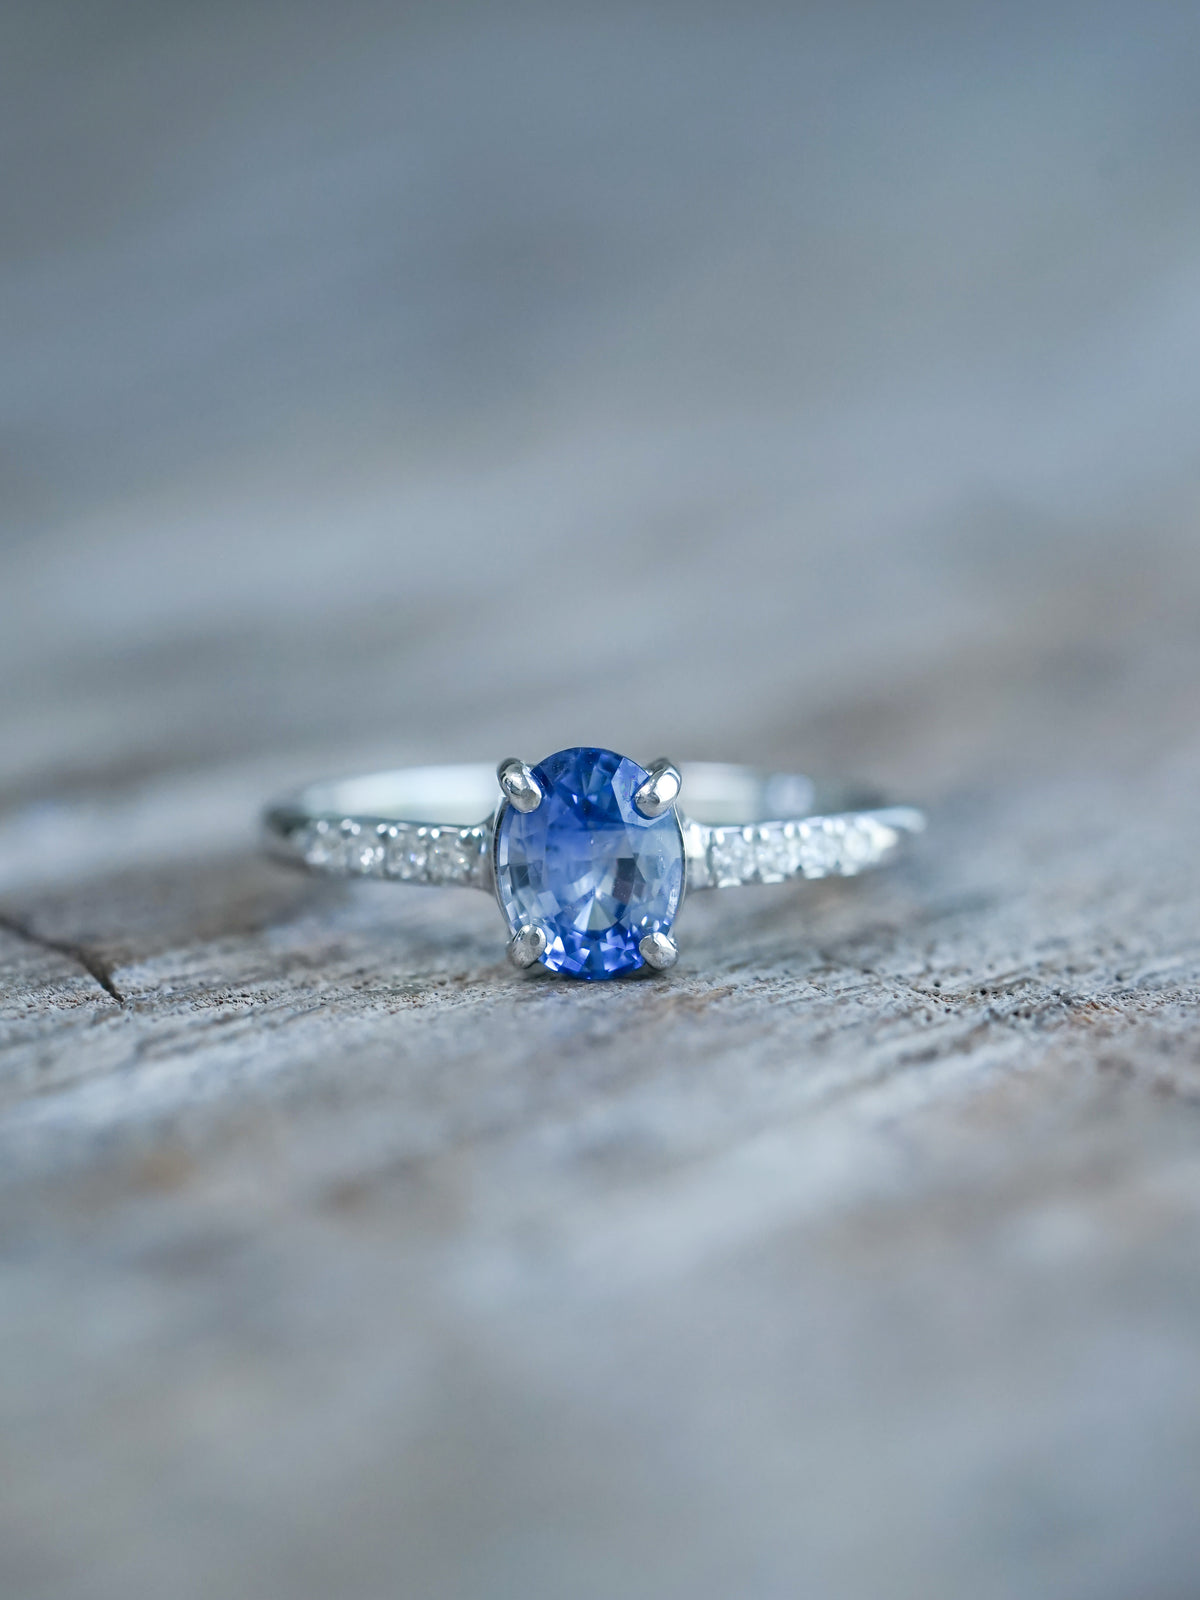 13 Unique Colored Engagement Rings We Love - Inspired By This